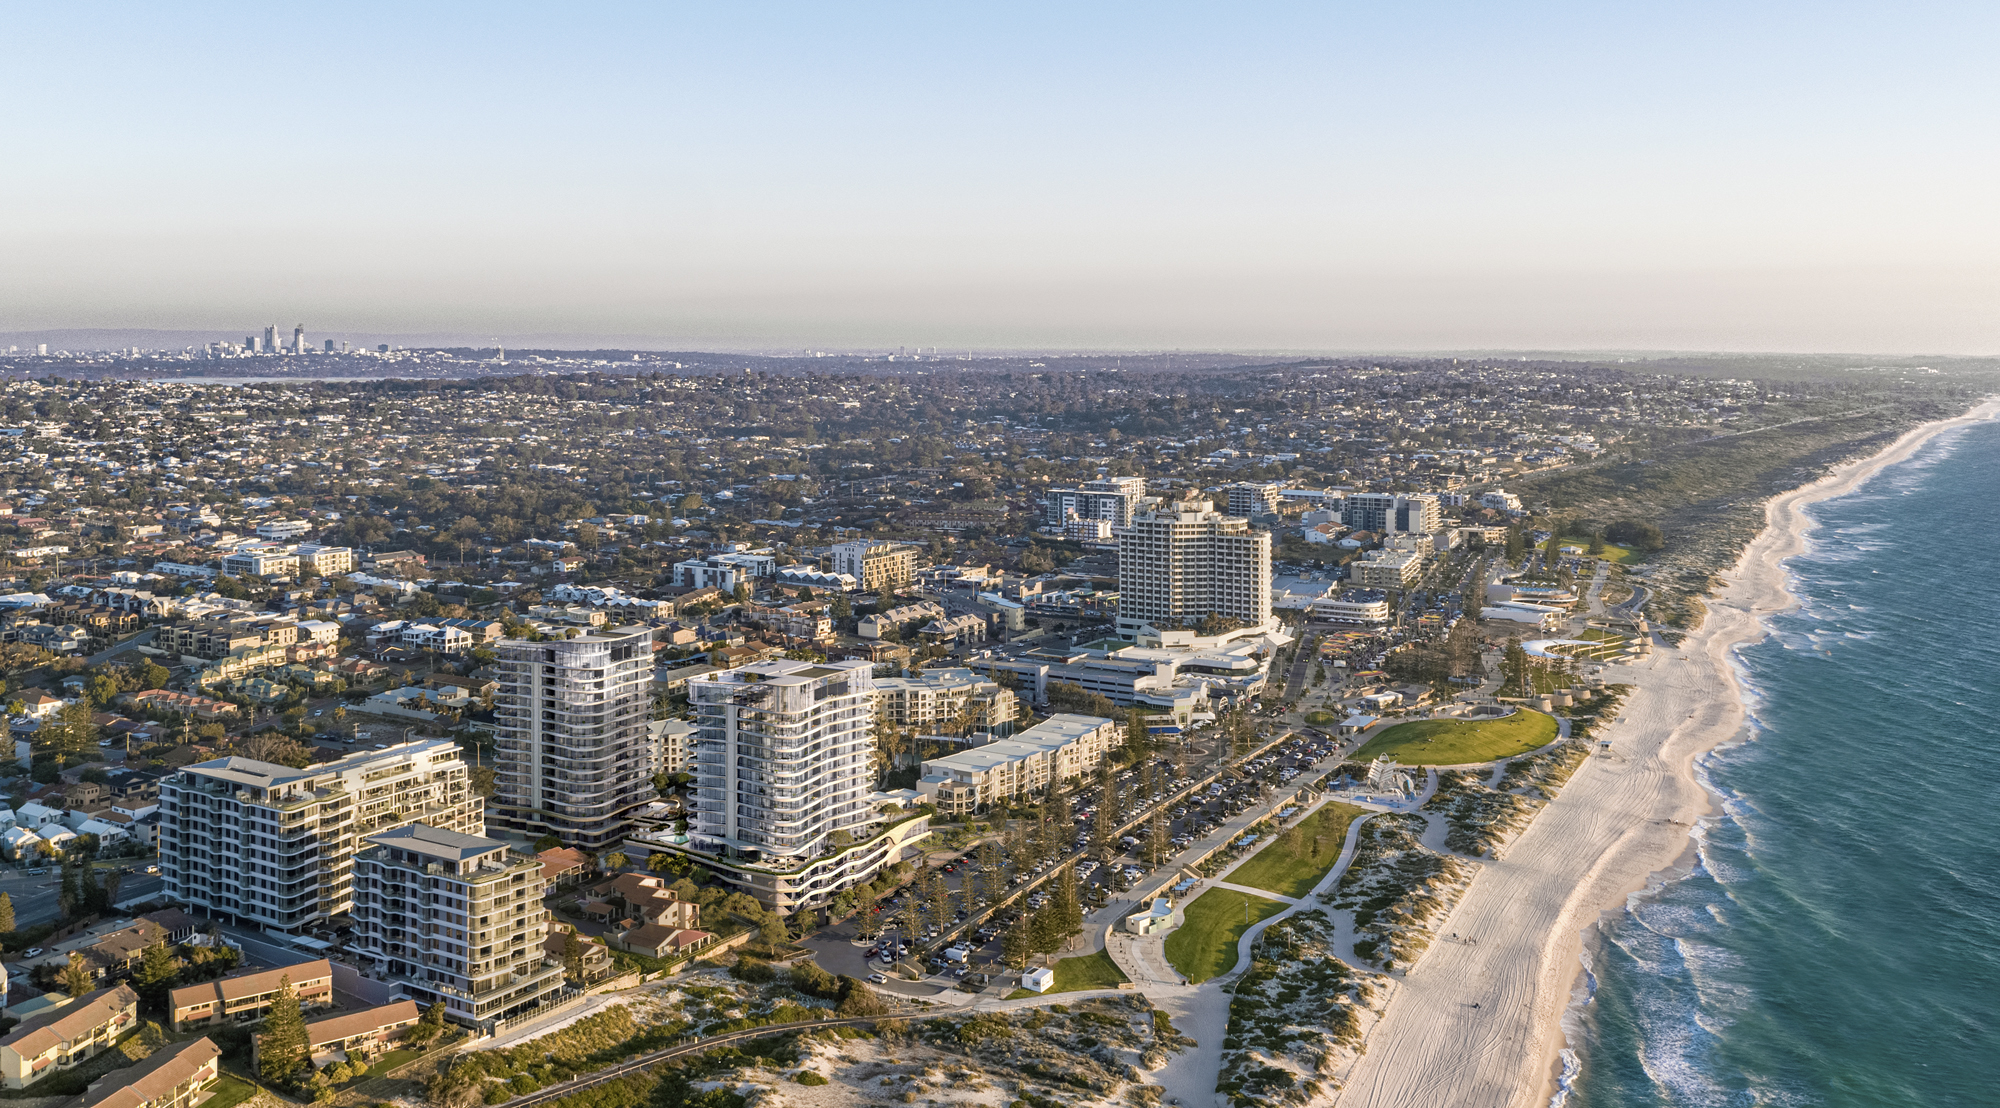 Roberts Co Appointed Builder for The Dunes Beachfront Residences in Scarborough, WA